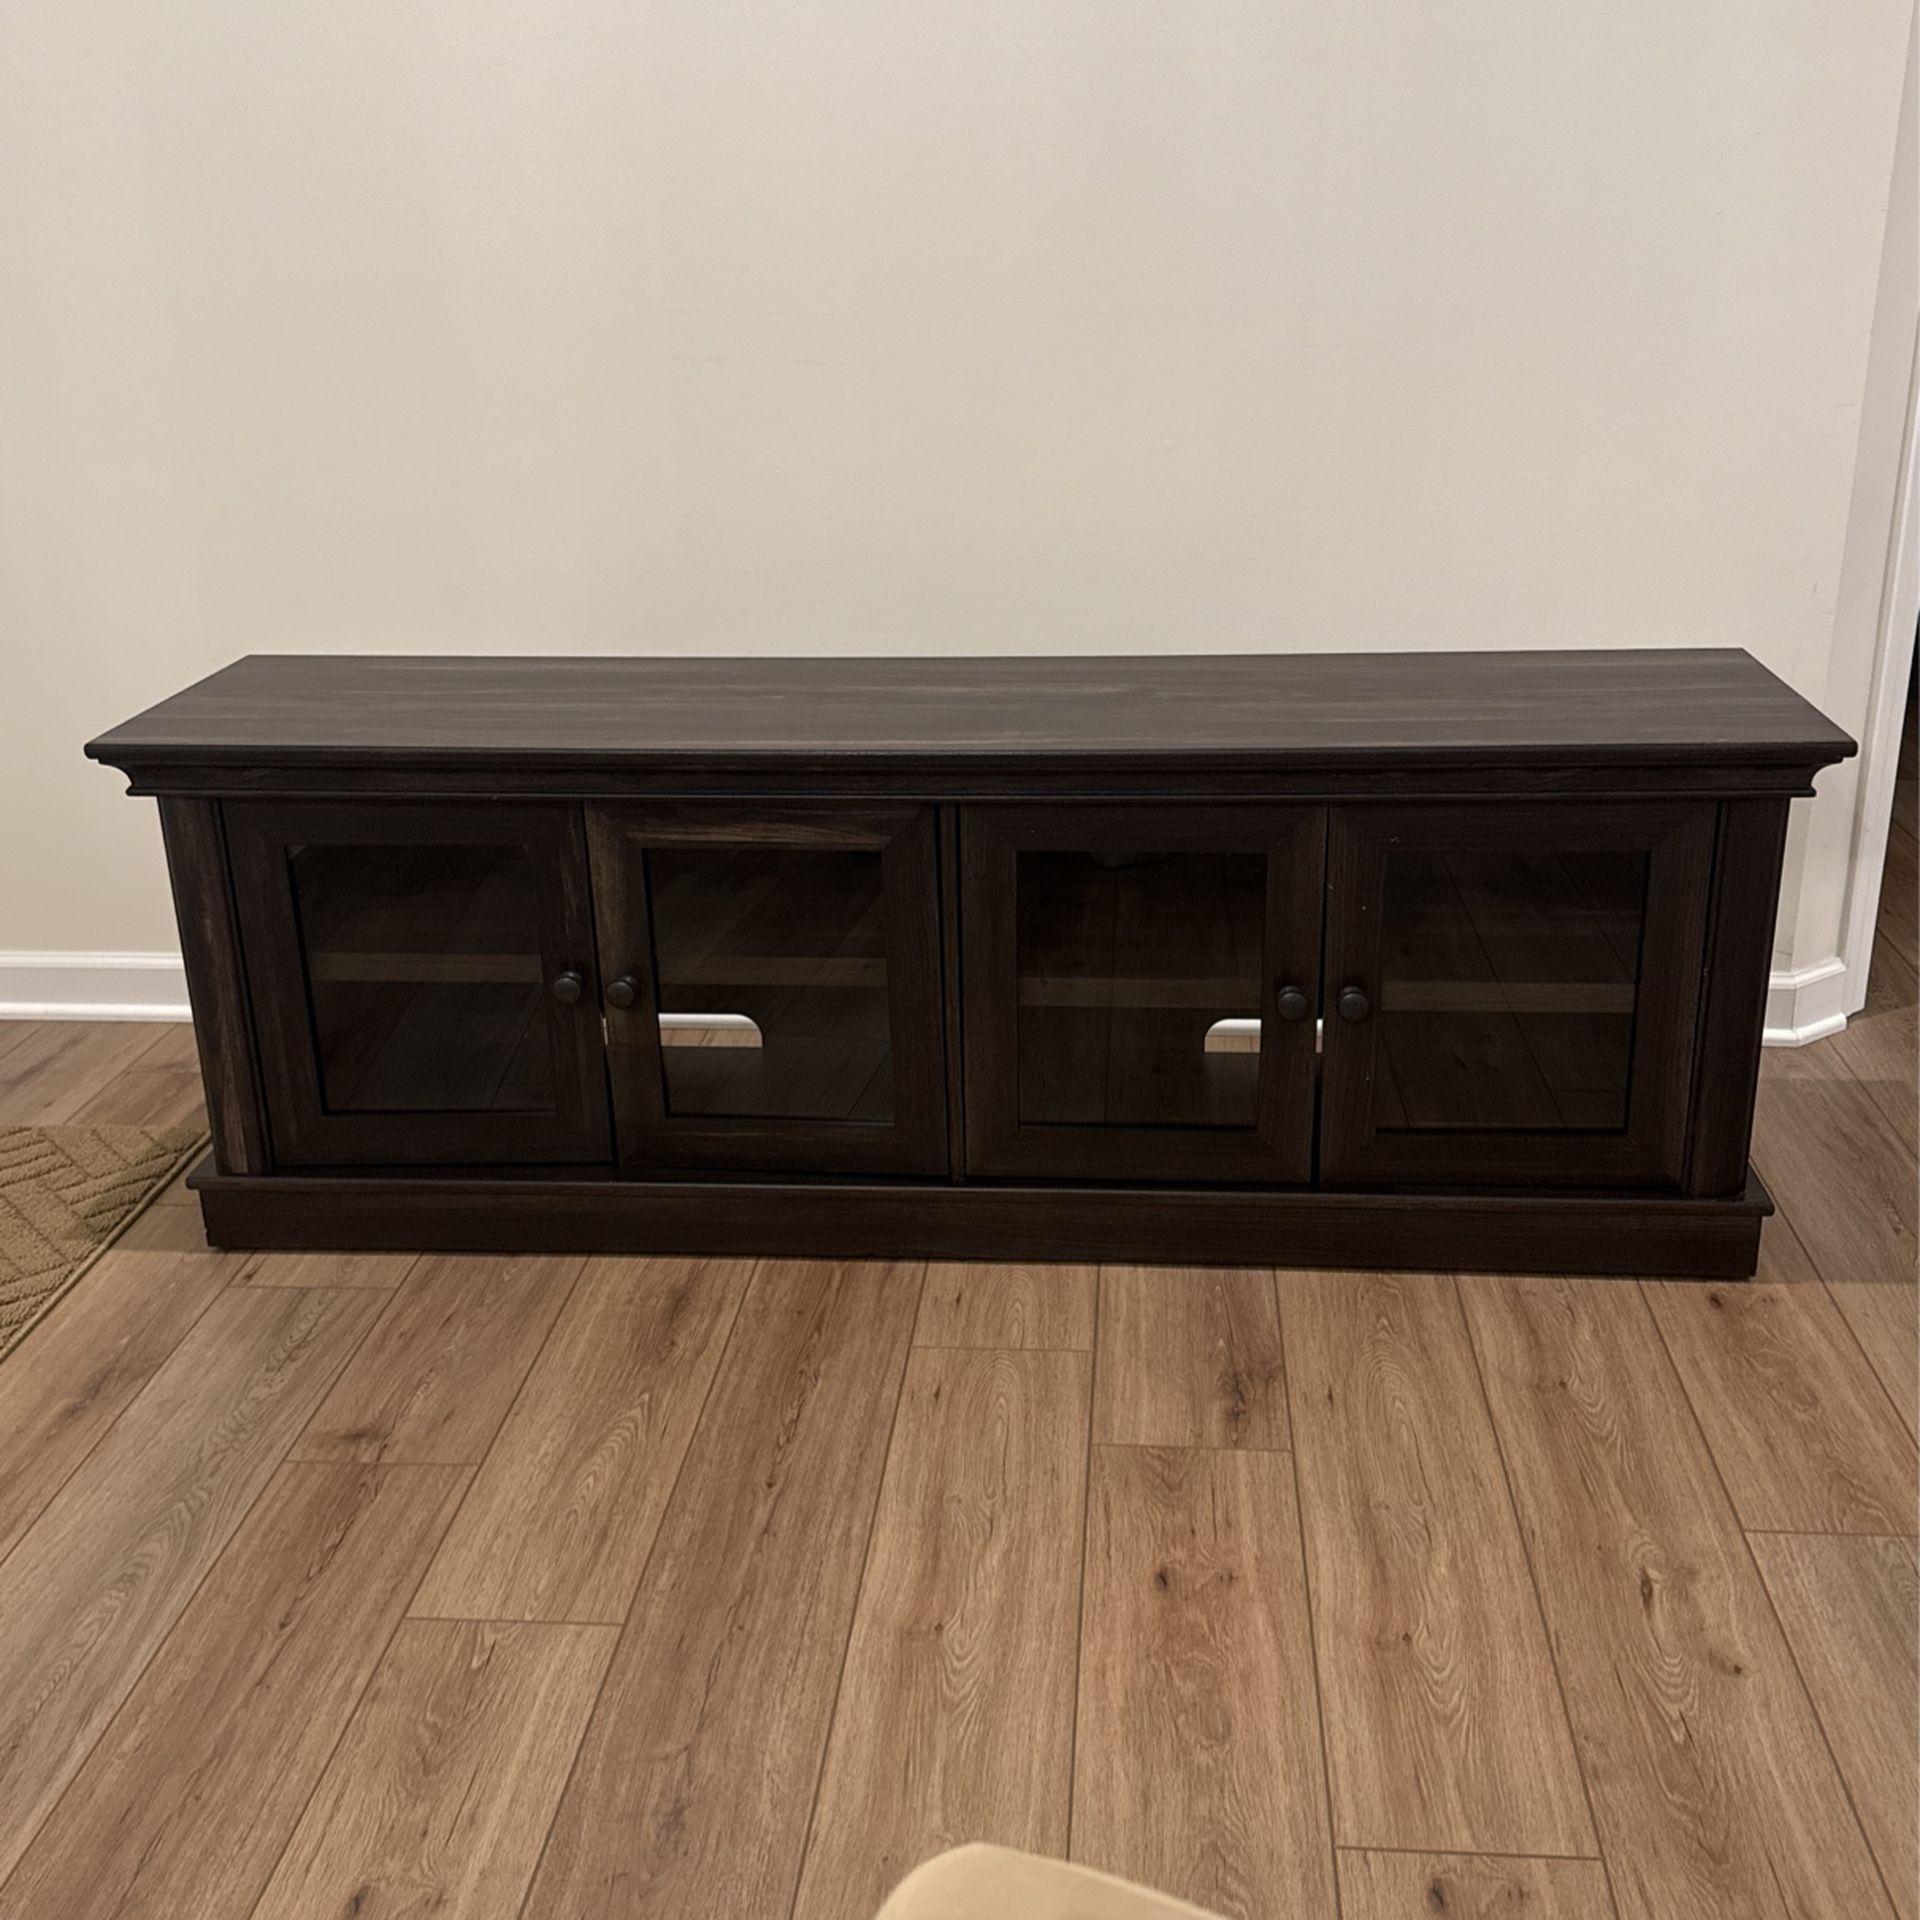 65x16x22 TV Stand, Solid Wood